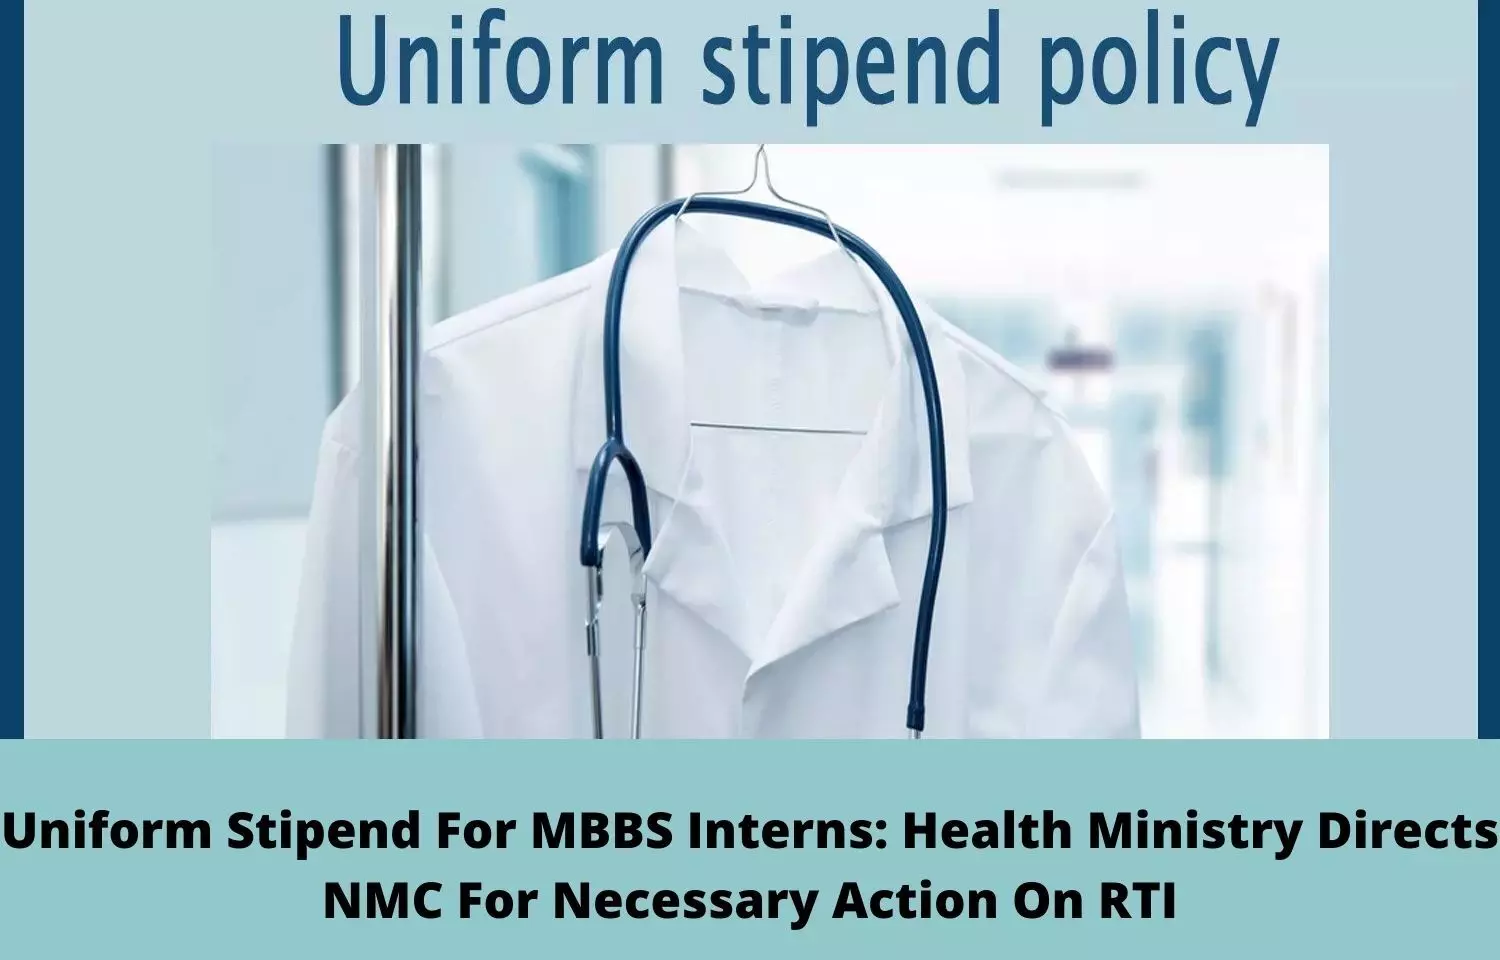 Uniform stipend for MBBS interns: Health Ministry directs NMC for necessary action on RTI